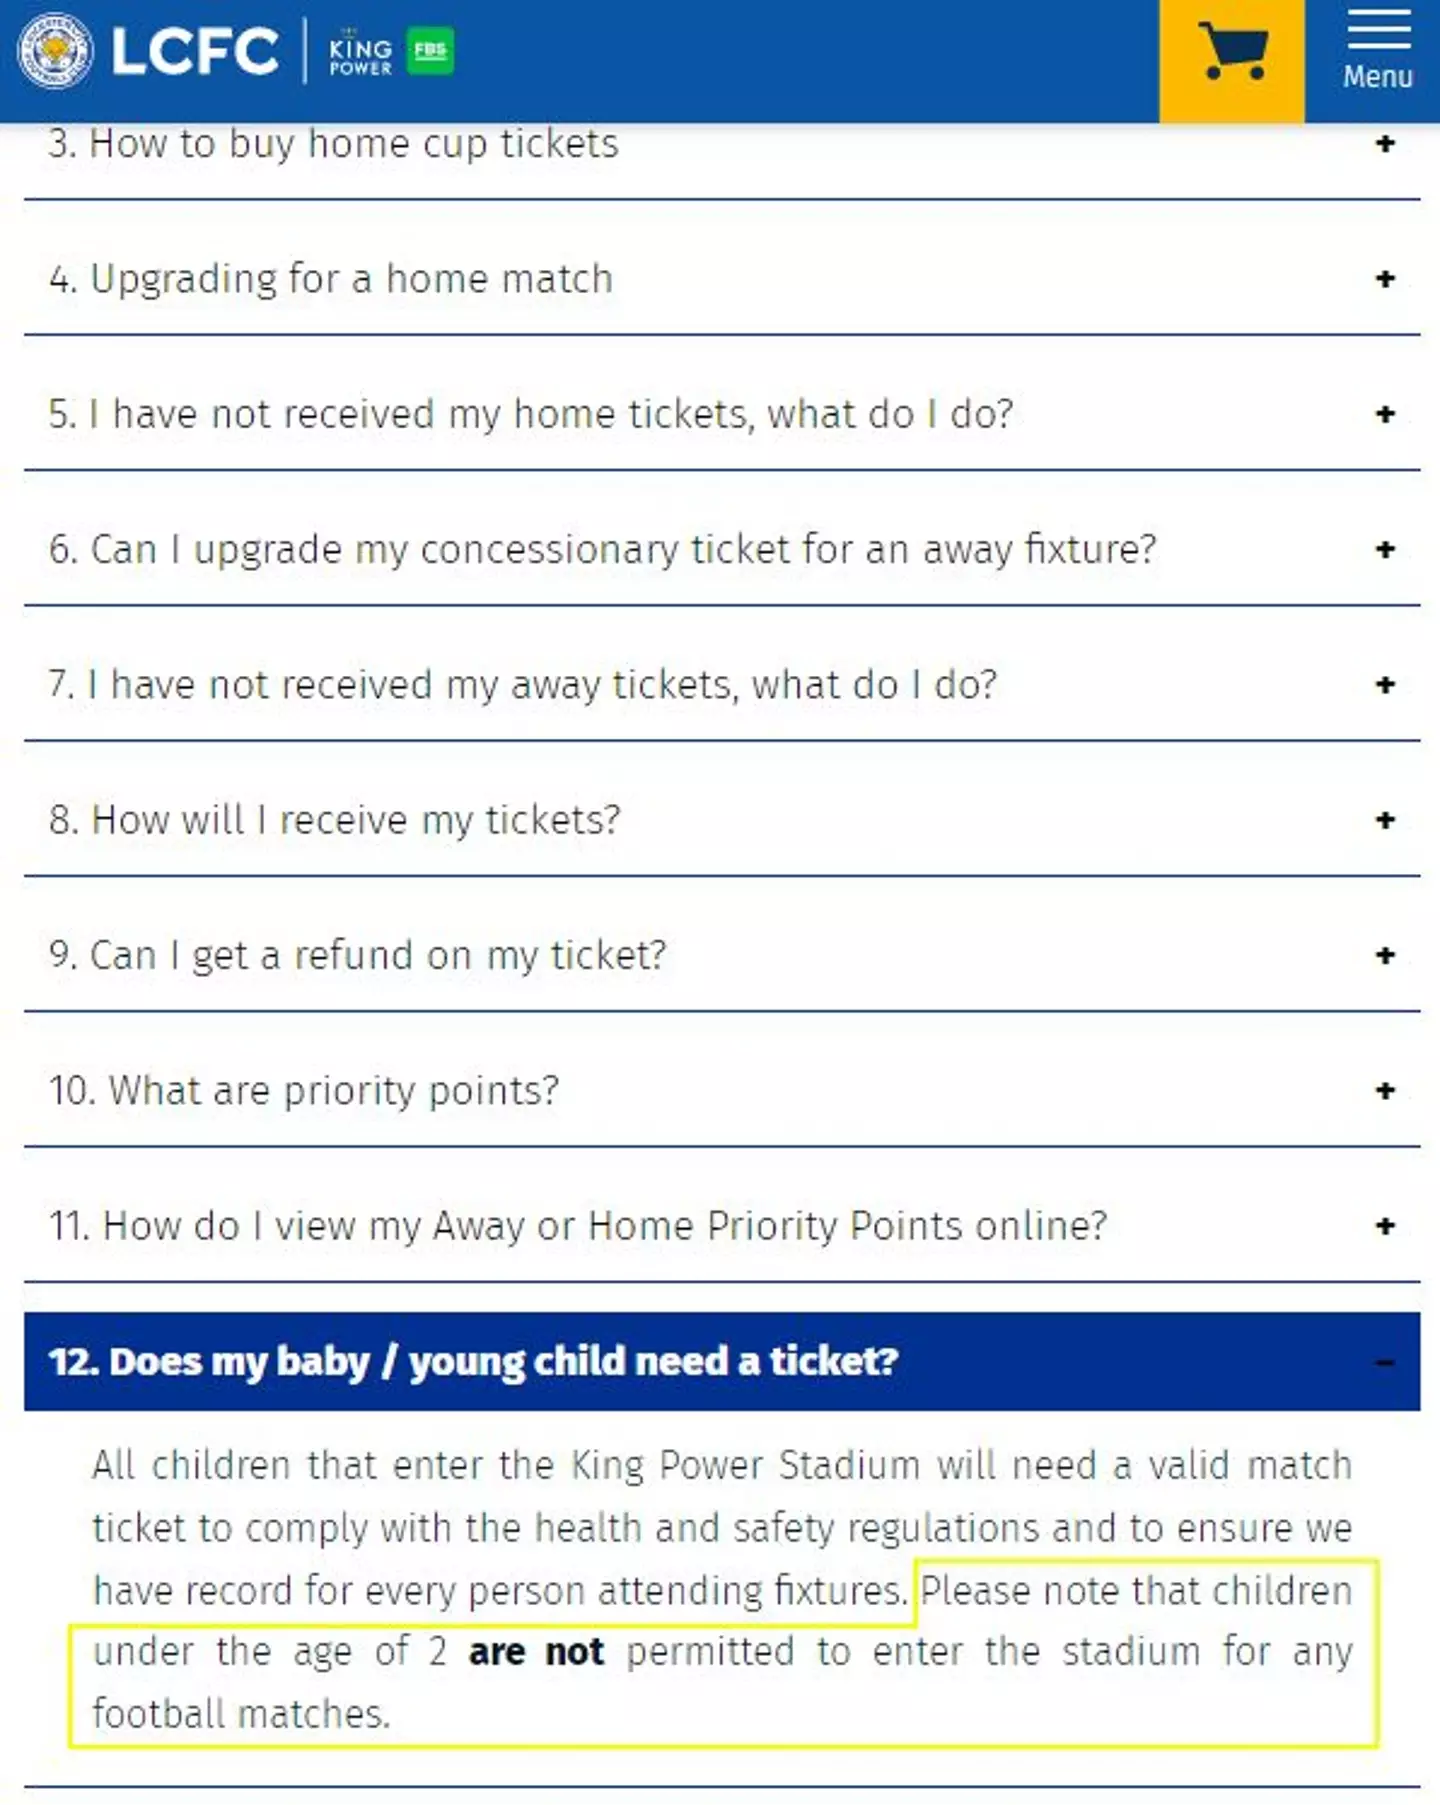 Leicester City's rules do say children younger than two aren't allowed in for games, though the mum and her baby were let into the stadium on the day.